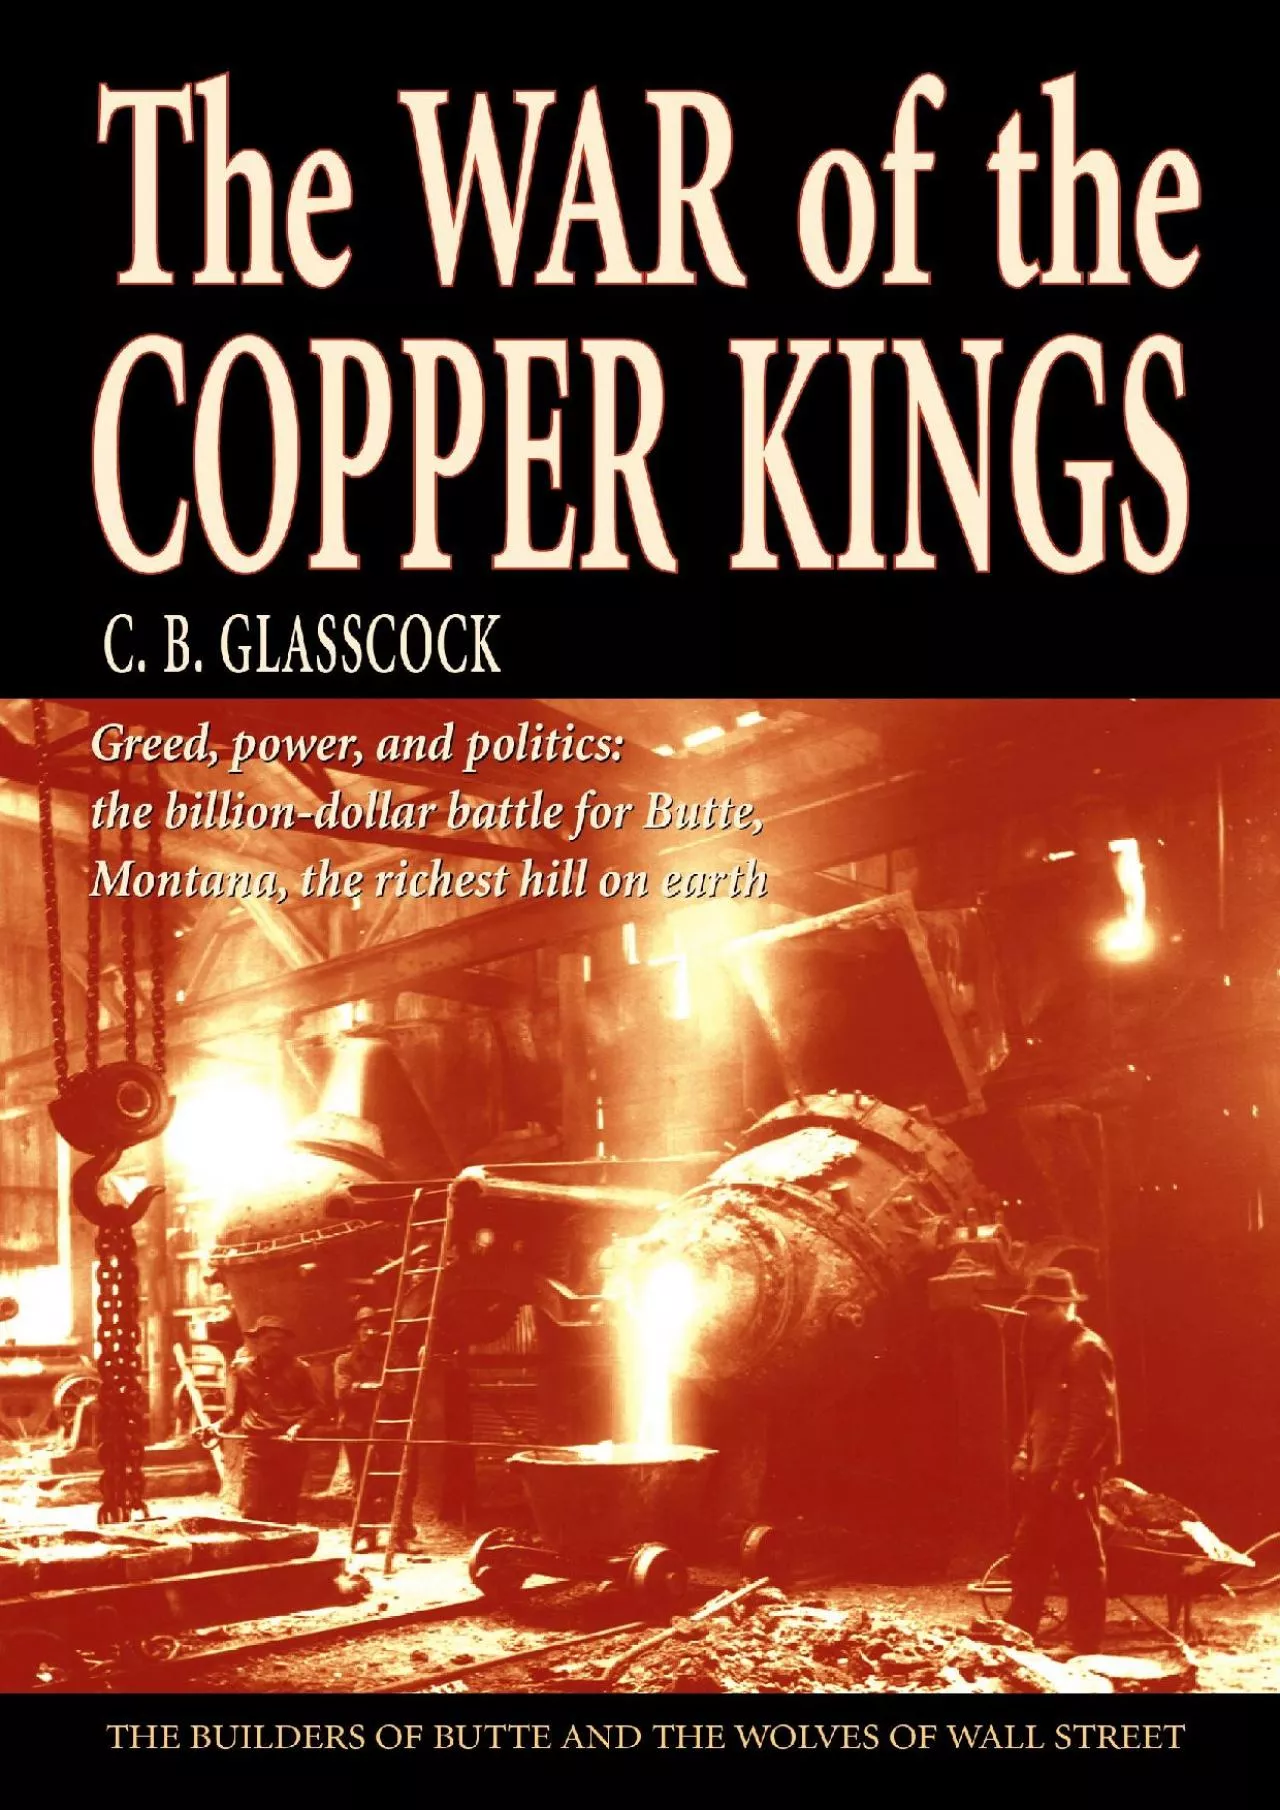 [DOWNLOAD]-The War of the Copper Kings: Greed, Power, and Politics